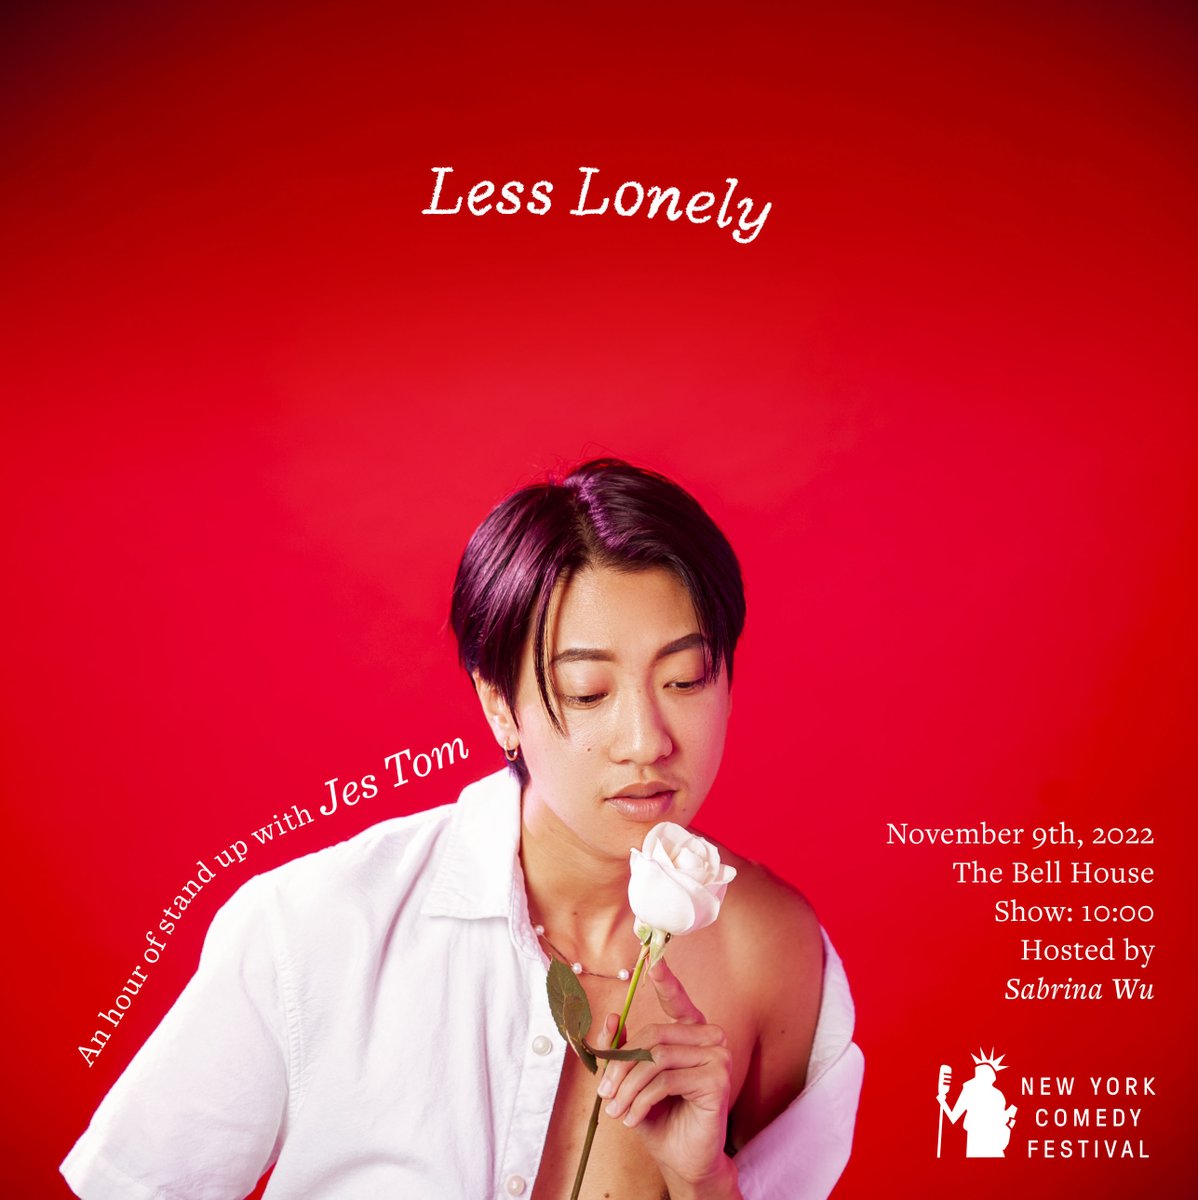 One week from tonight, @nycomedyfest presents @jestom: Less Lonely! Hosted by @asabrinawu, Jes Tom presents an hour of standup on sex in the face of death, gender transition on the brink of oblivion & the search for love at the end of the world🔥 🎟: bit.ly/3SVfEes